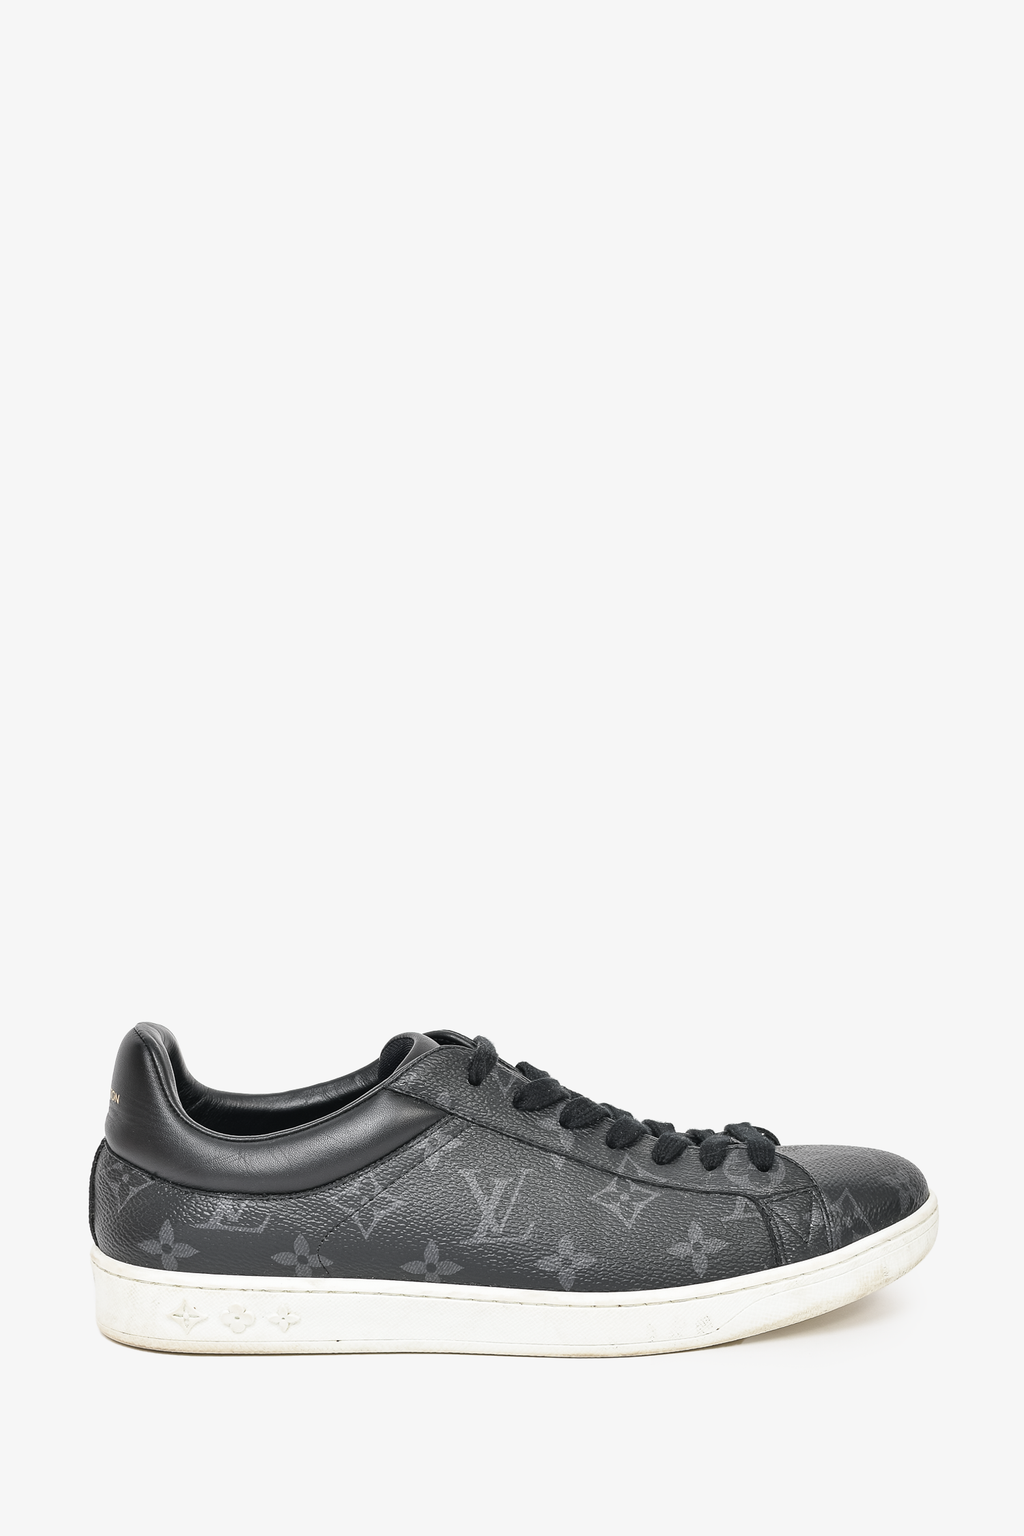 Louis Vuitton Luxembourg Low 'Eclipse